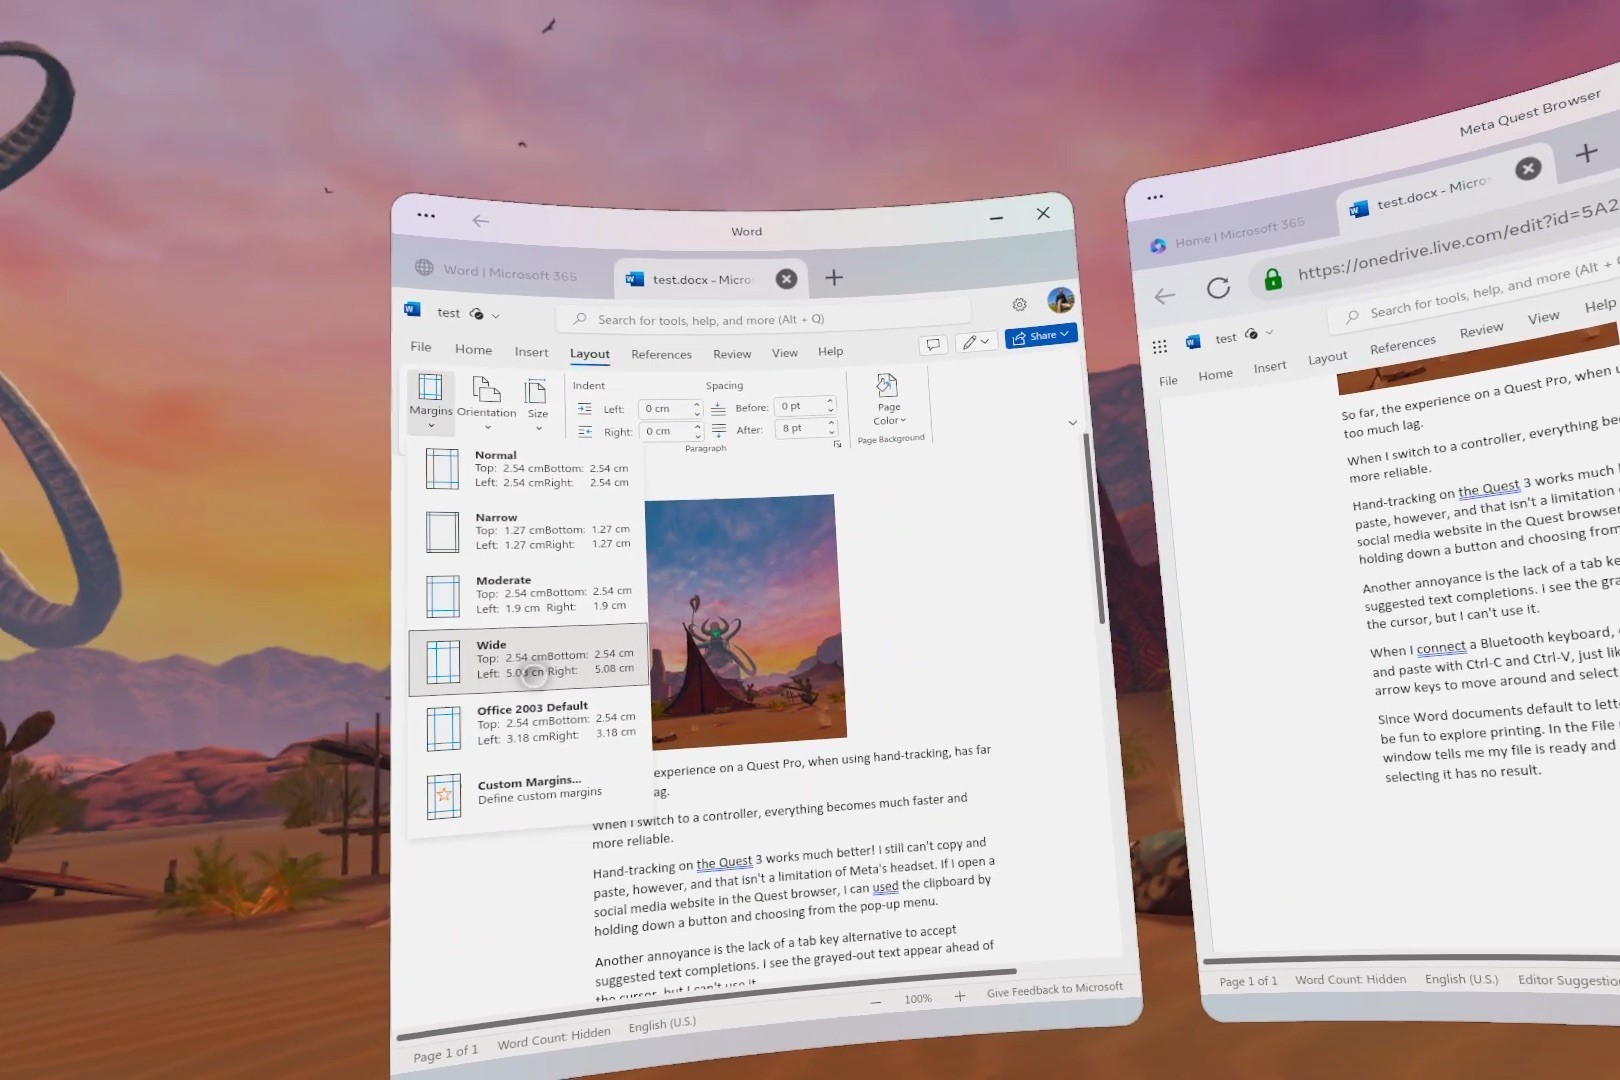 Most features, like adjusting a document's layout in Word, work fine on a Quest 3.